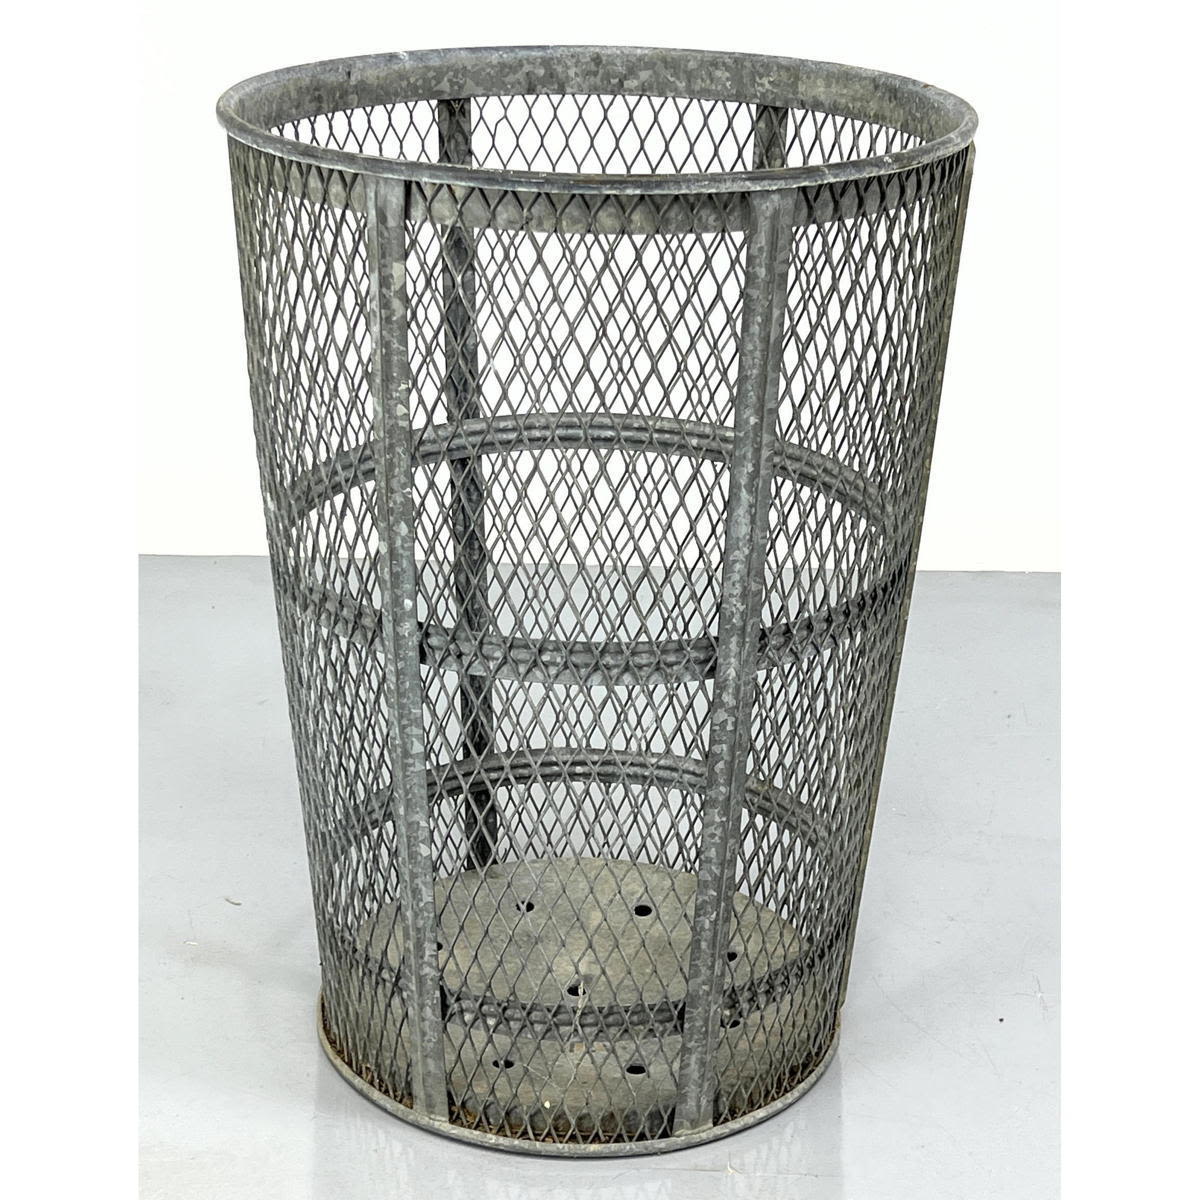 Vintage Wire Mesh Trash Can. Waste Can.